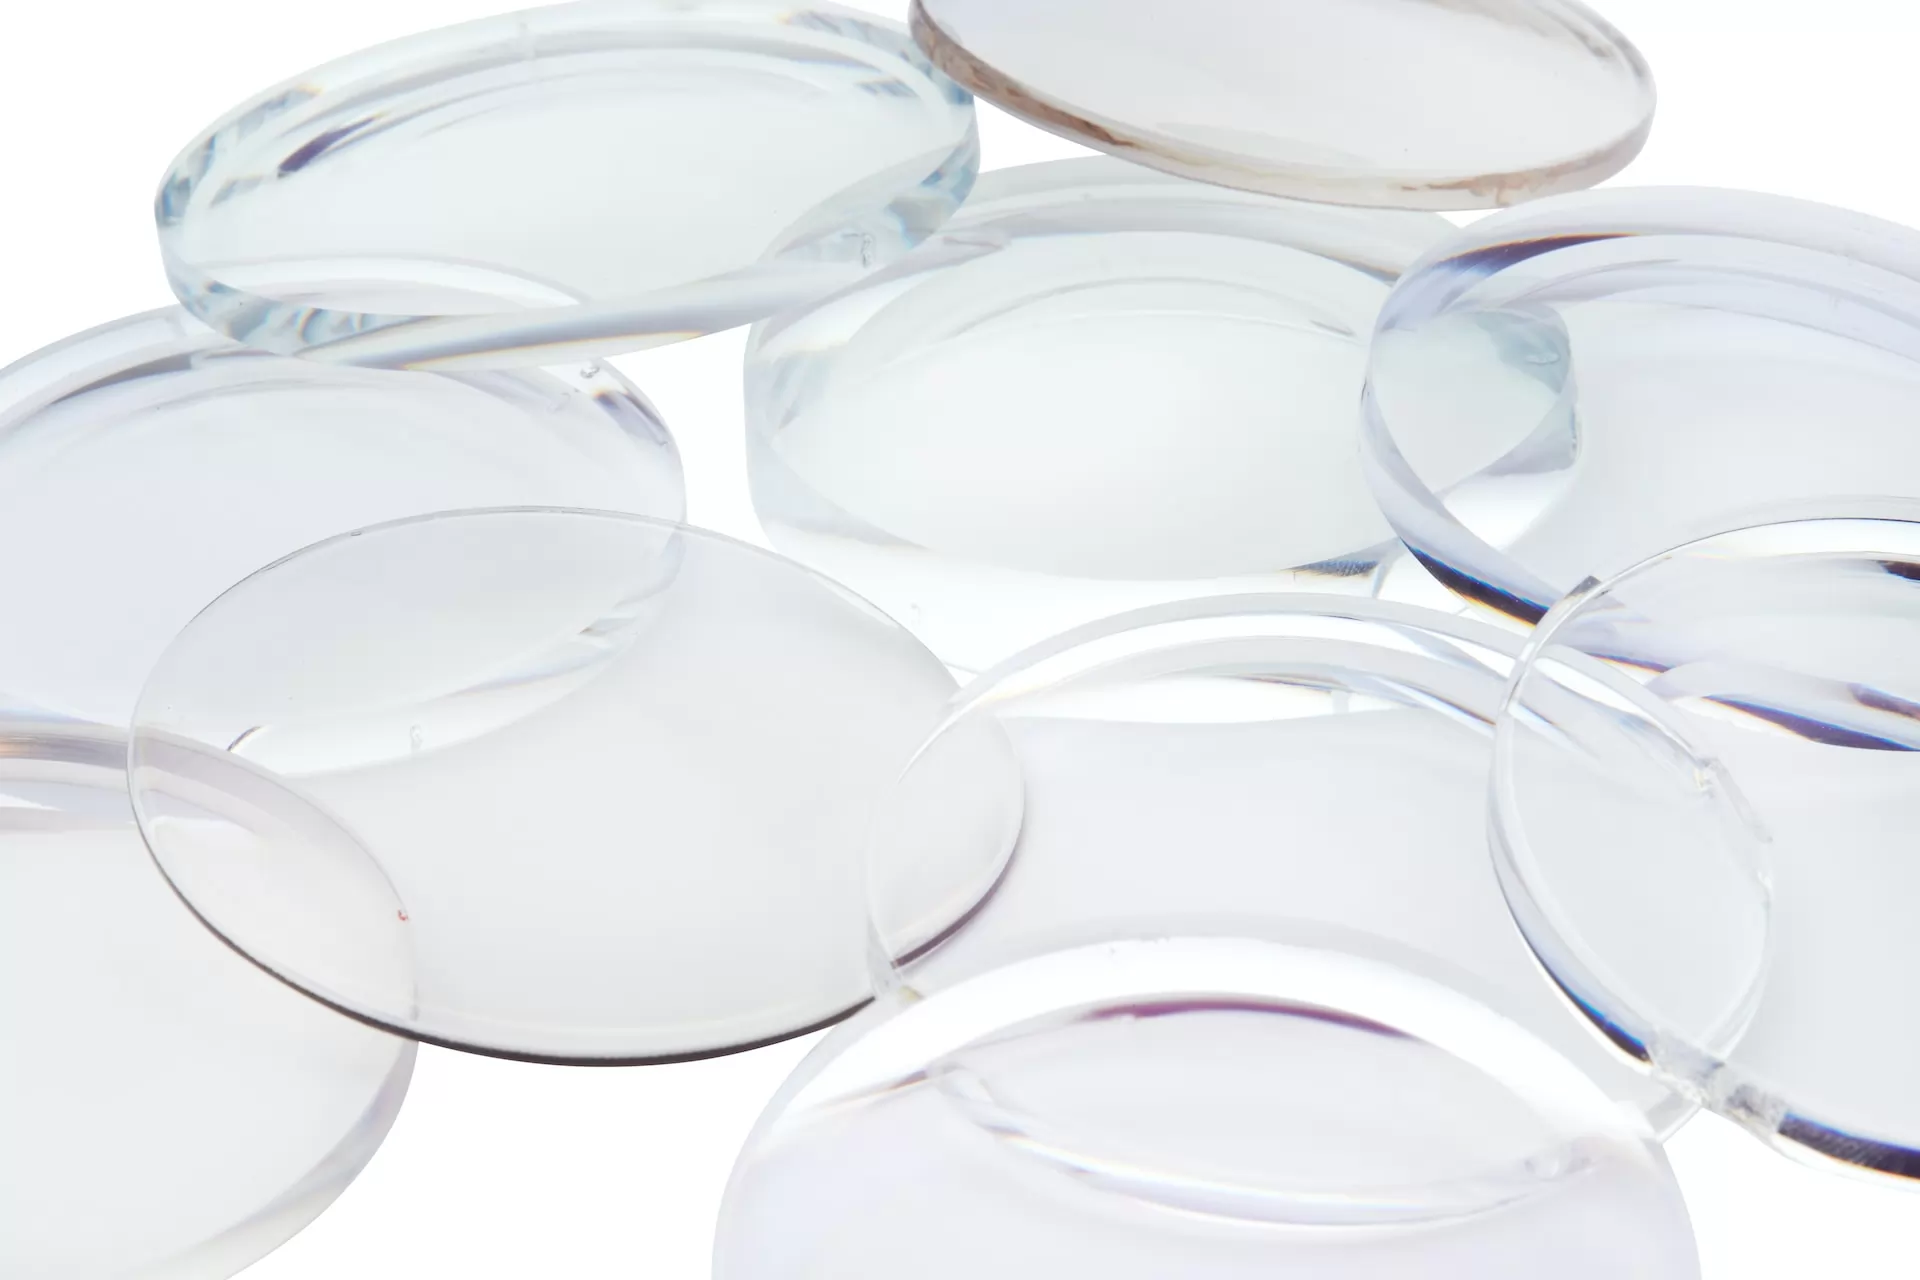 The ophthalmic lenses market